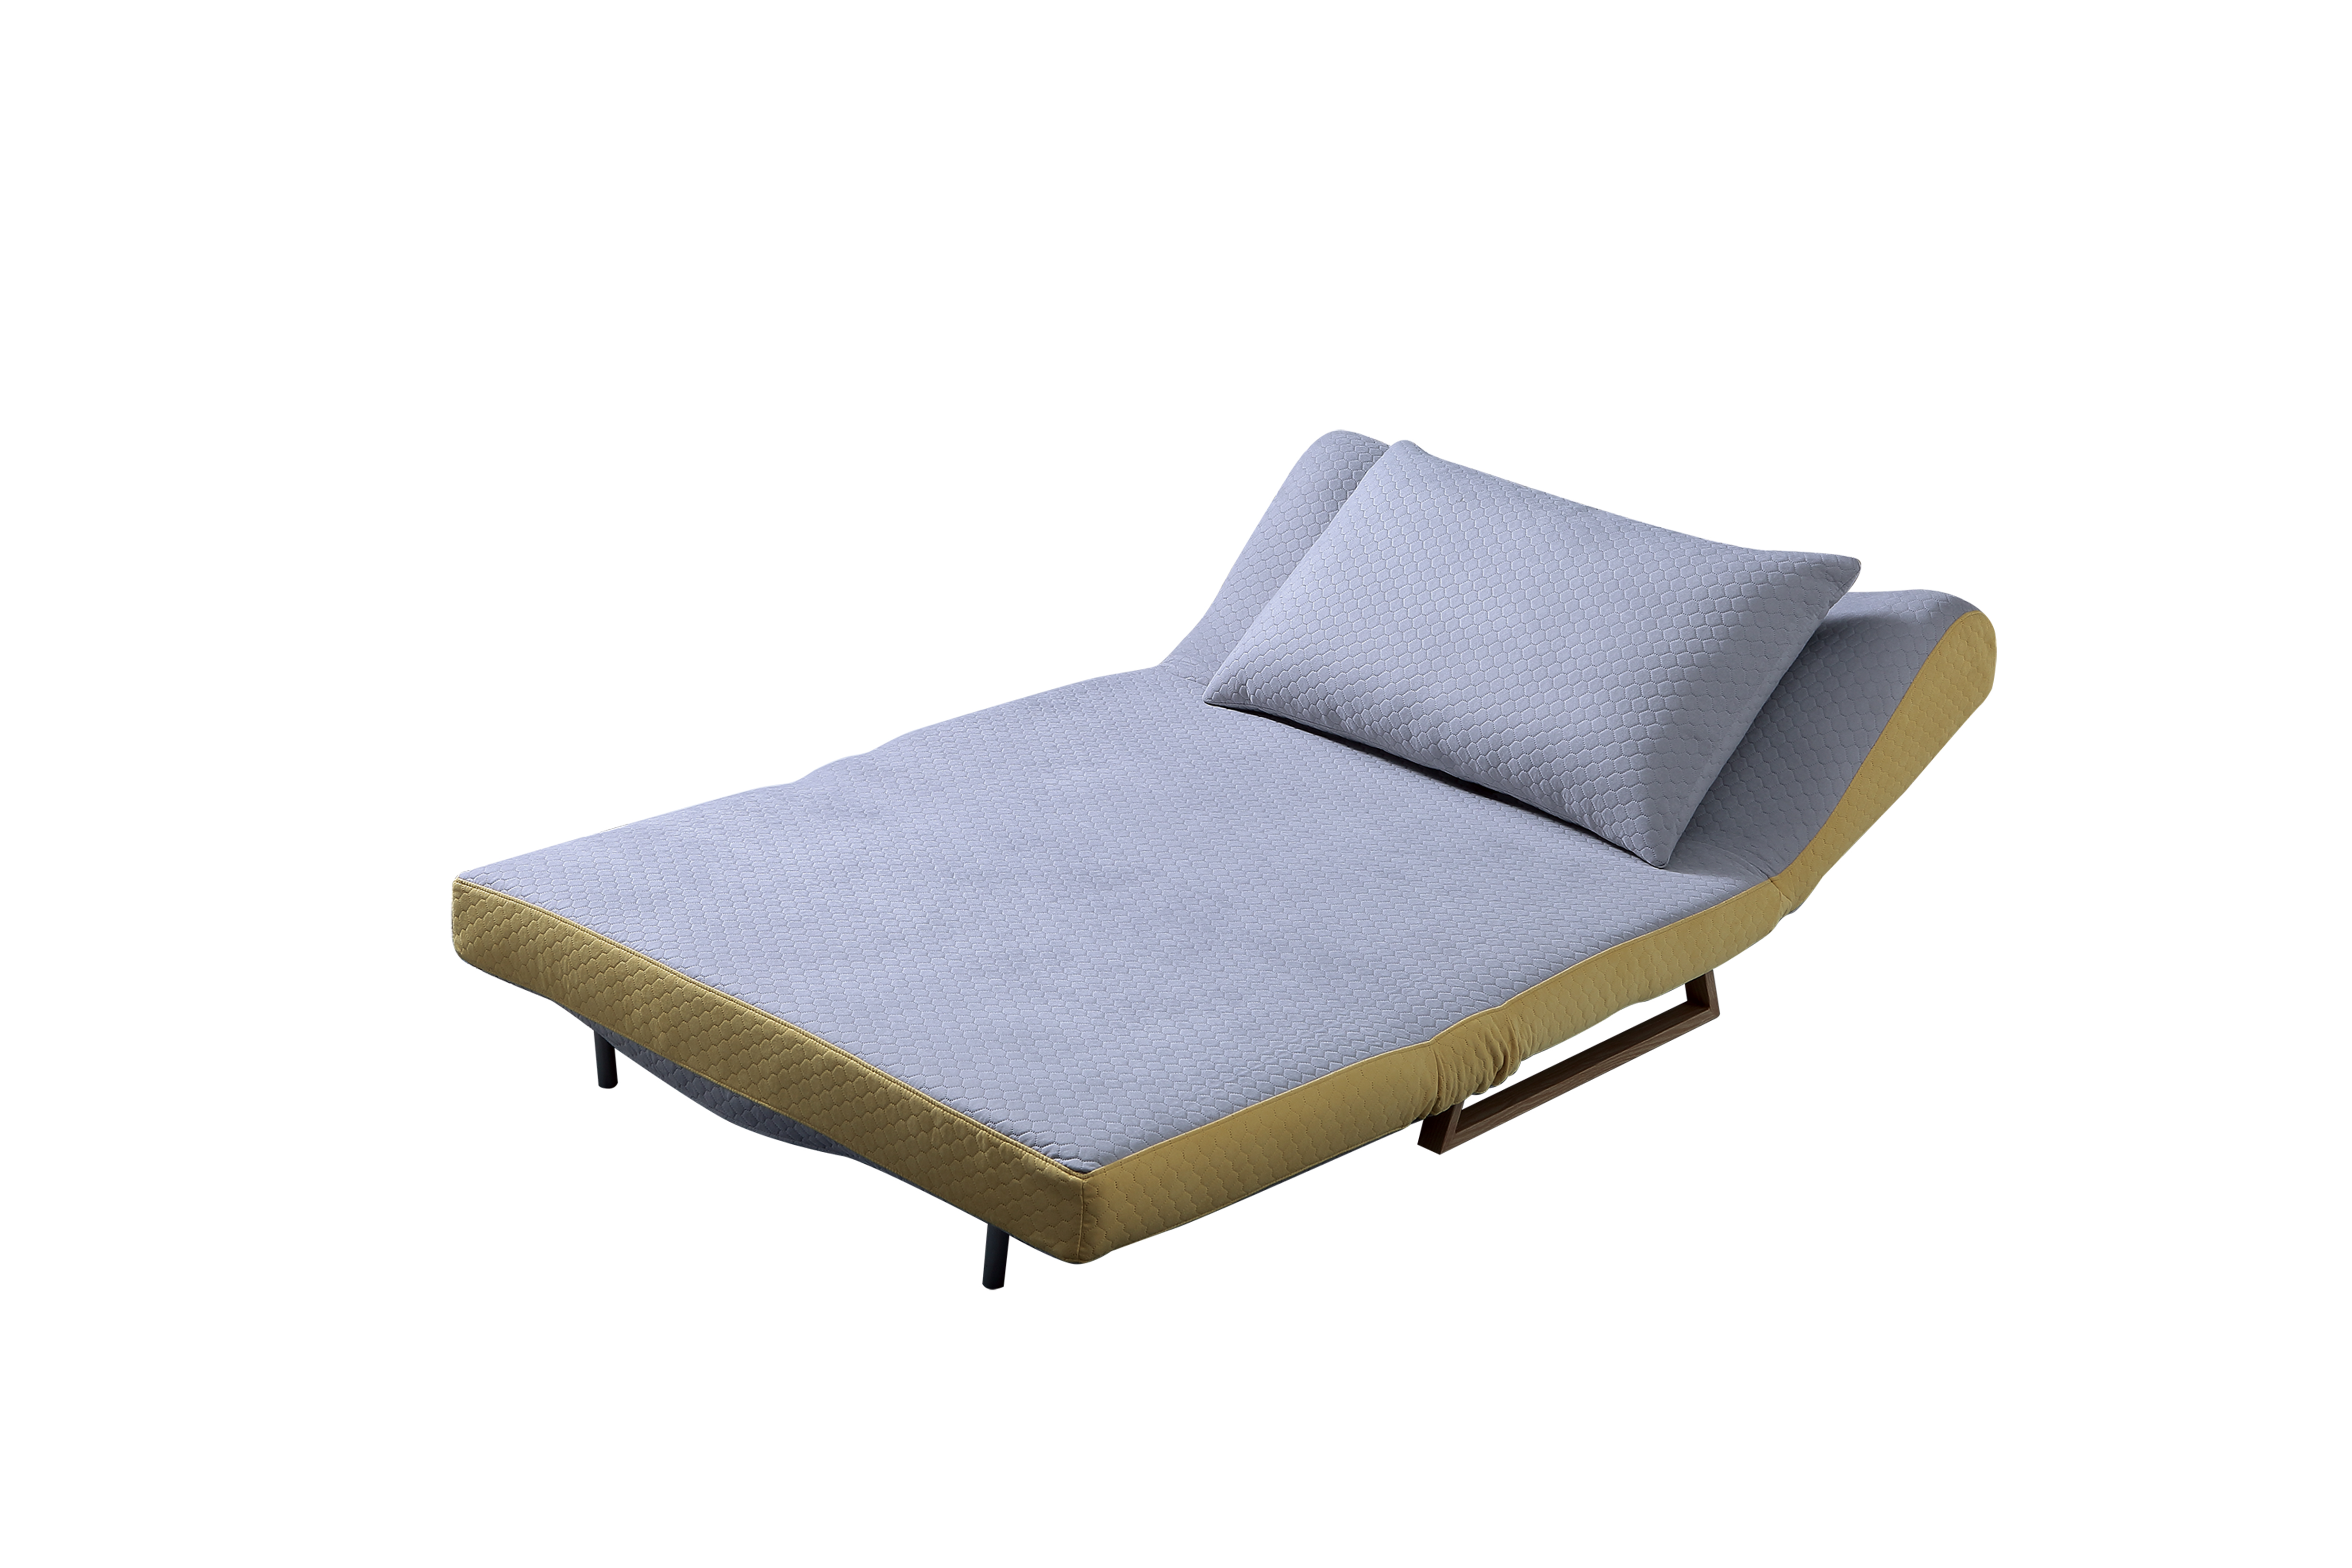 Hot selling foldable sofabed bed OM-6005